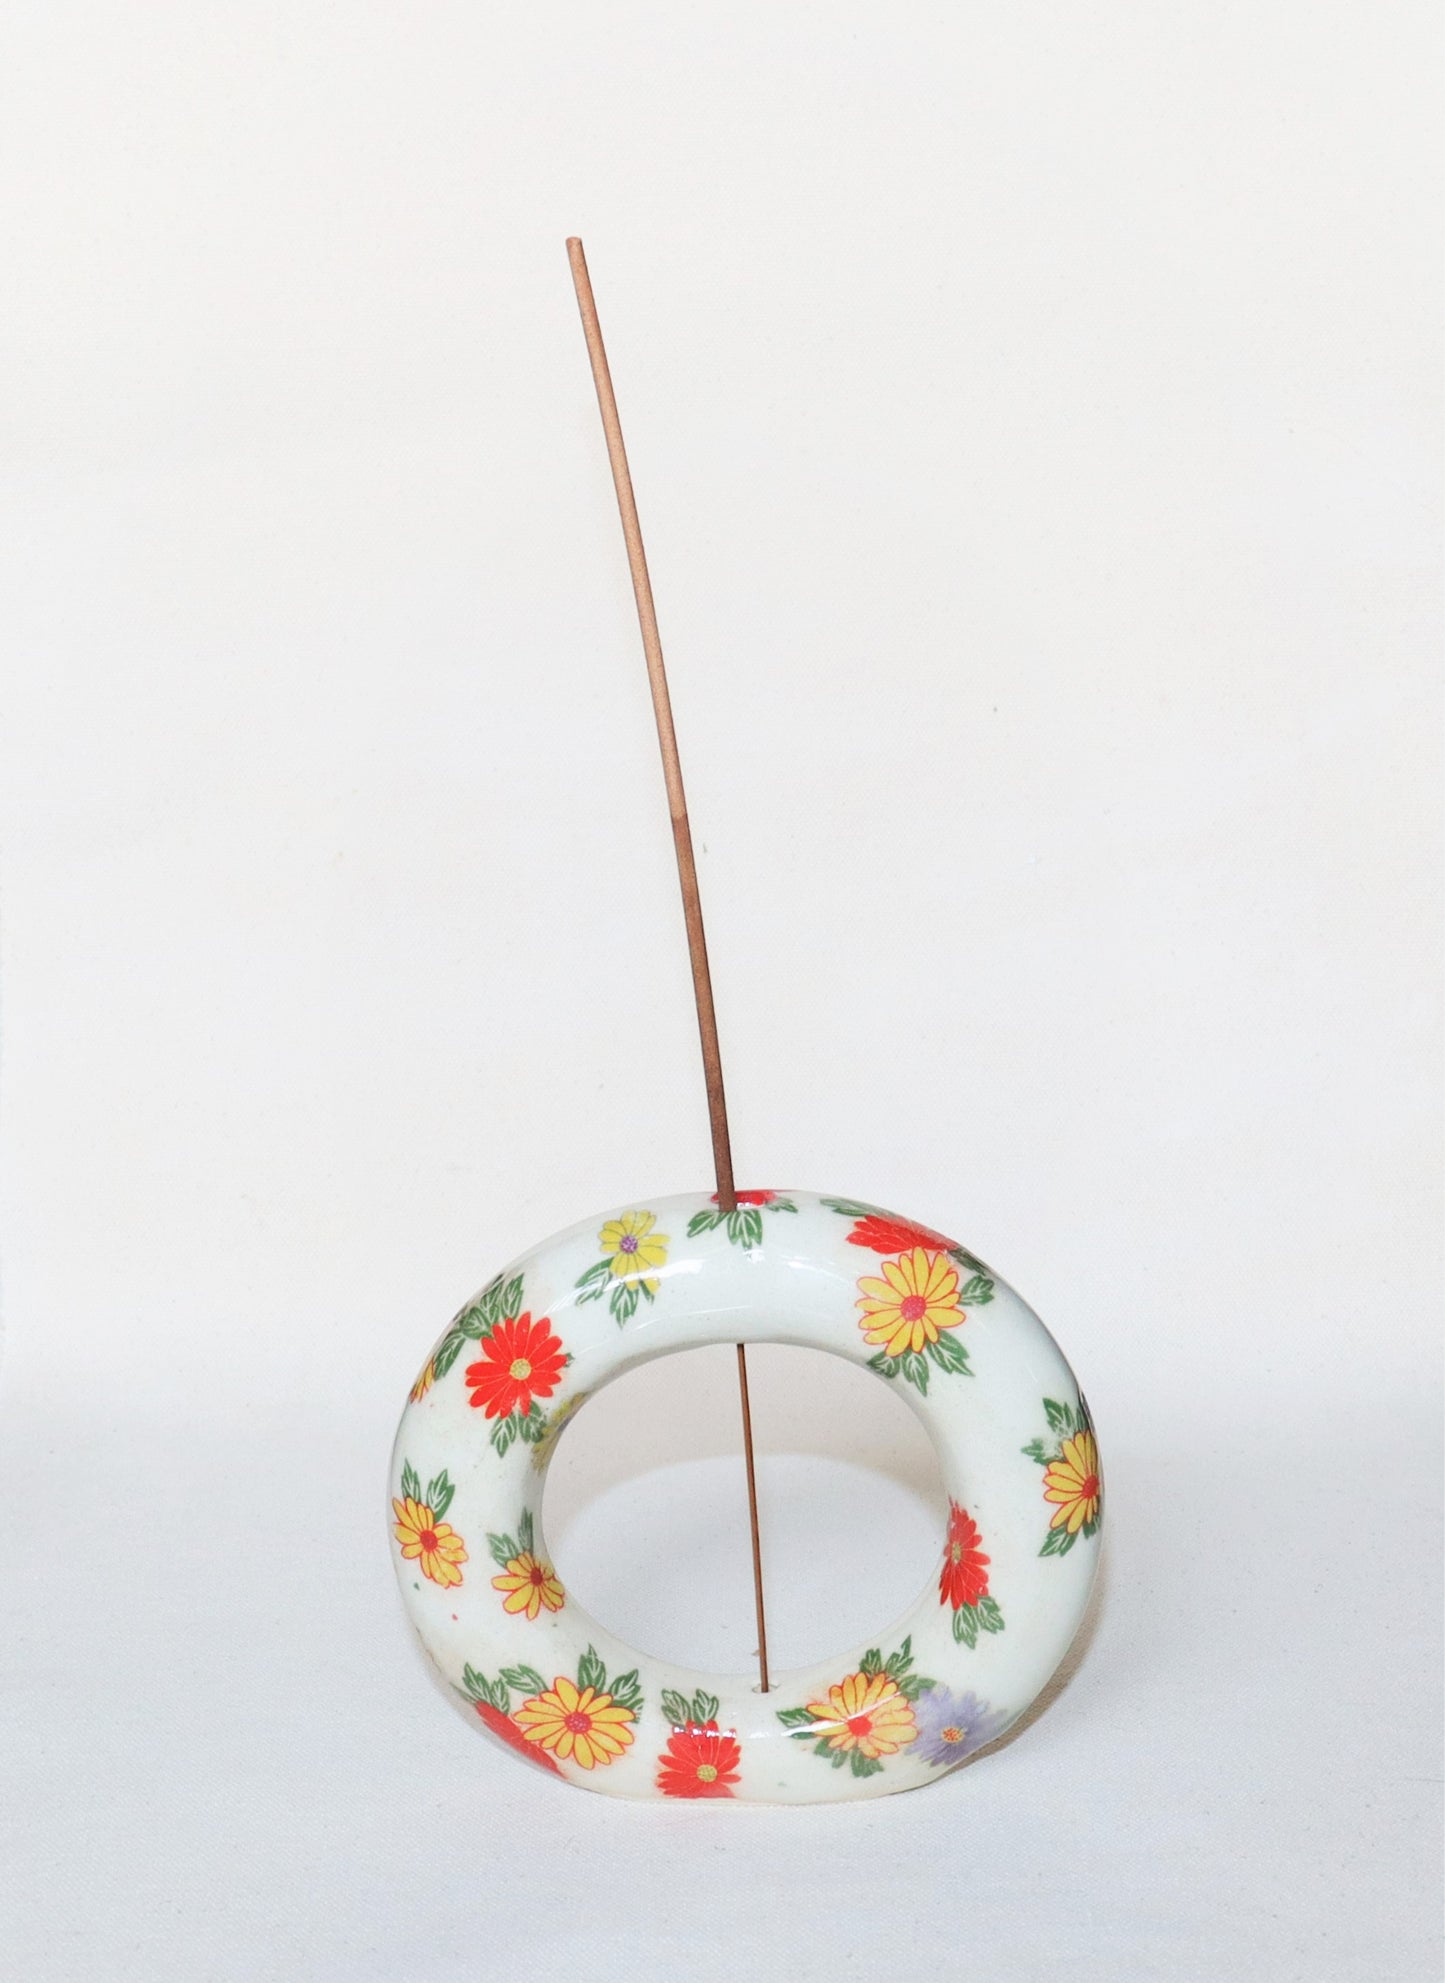 The Incense Ring - Daisy